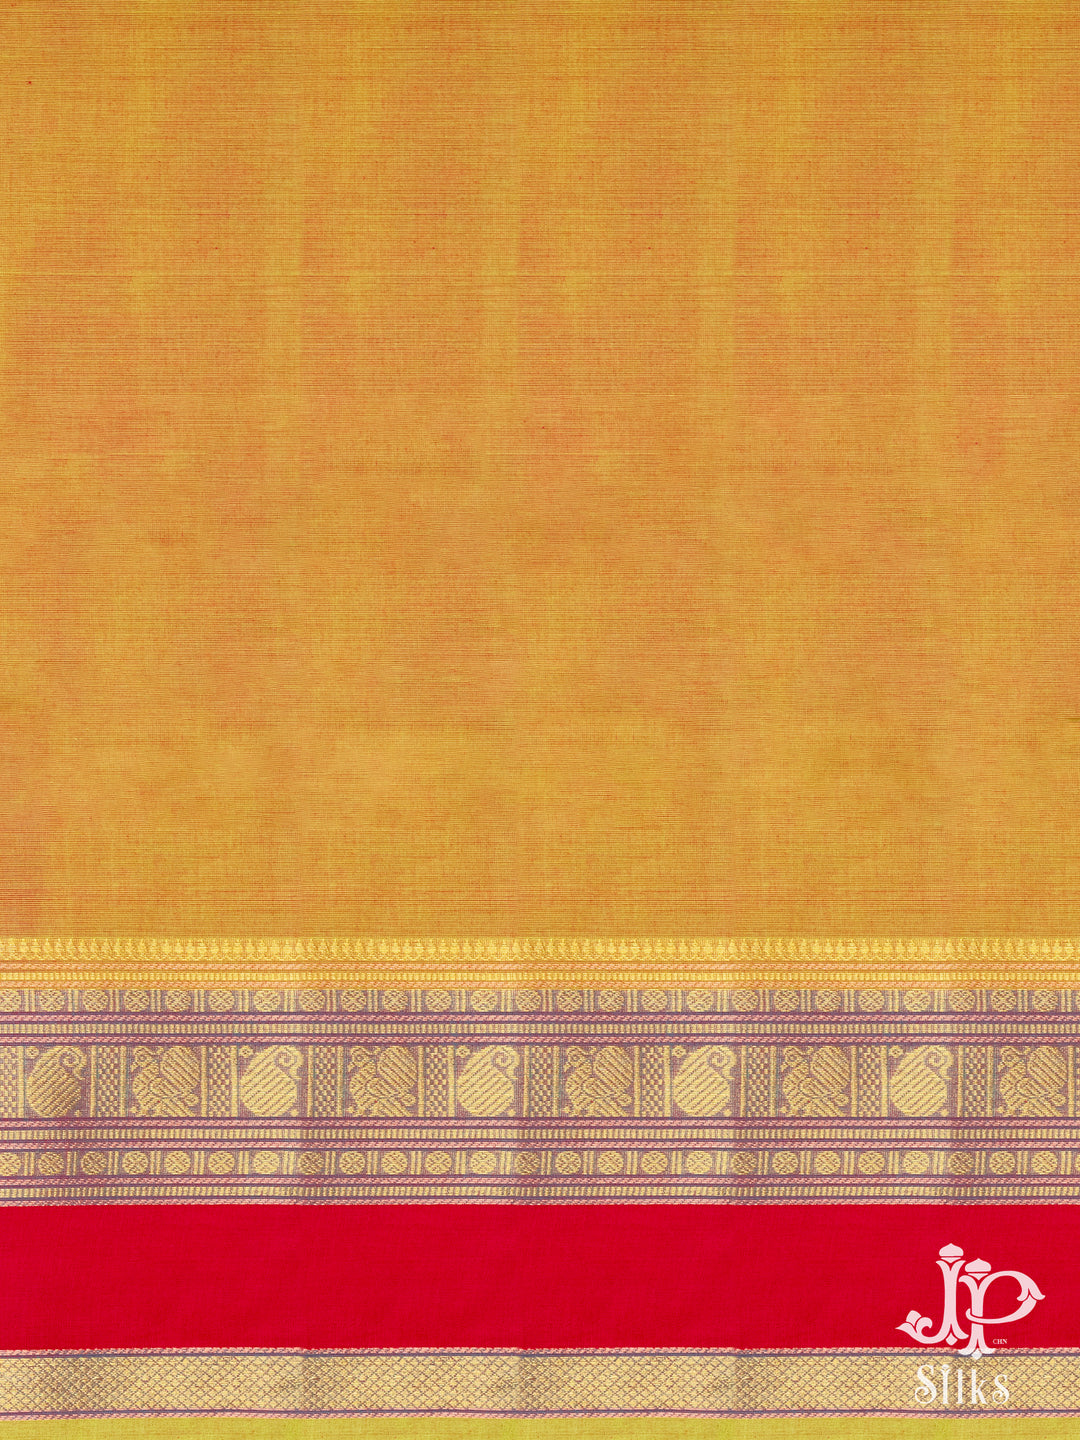 Mustard Yellow and Red Cotton Saree - D9680 - VIew 2